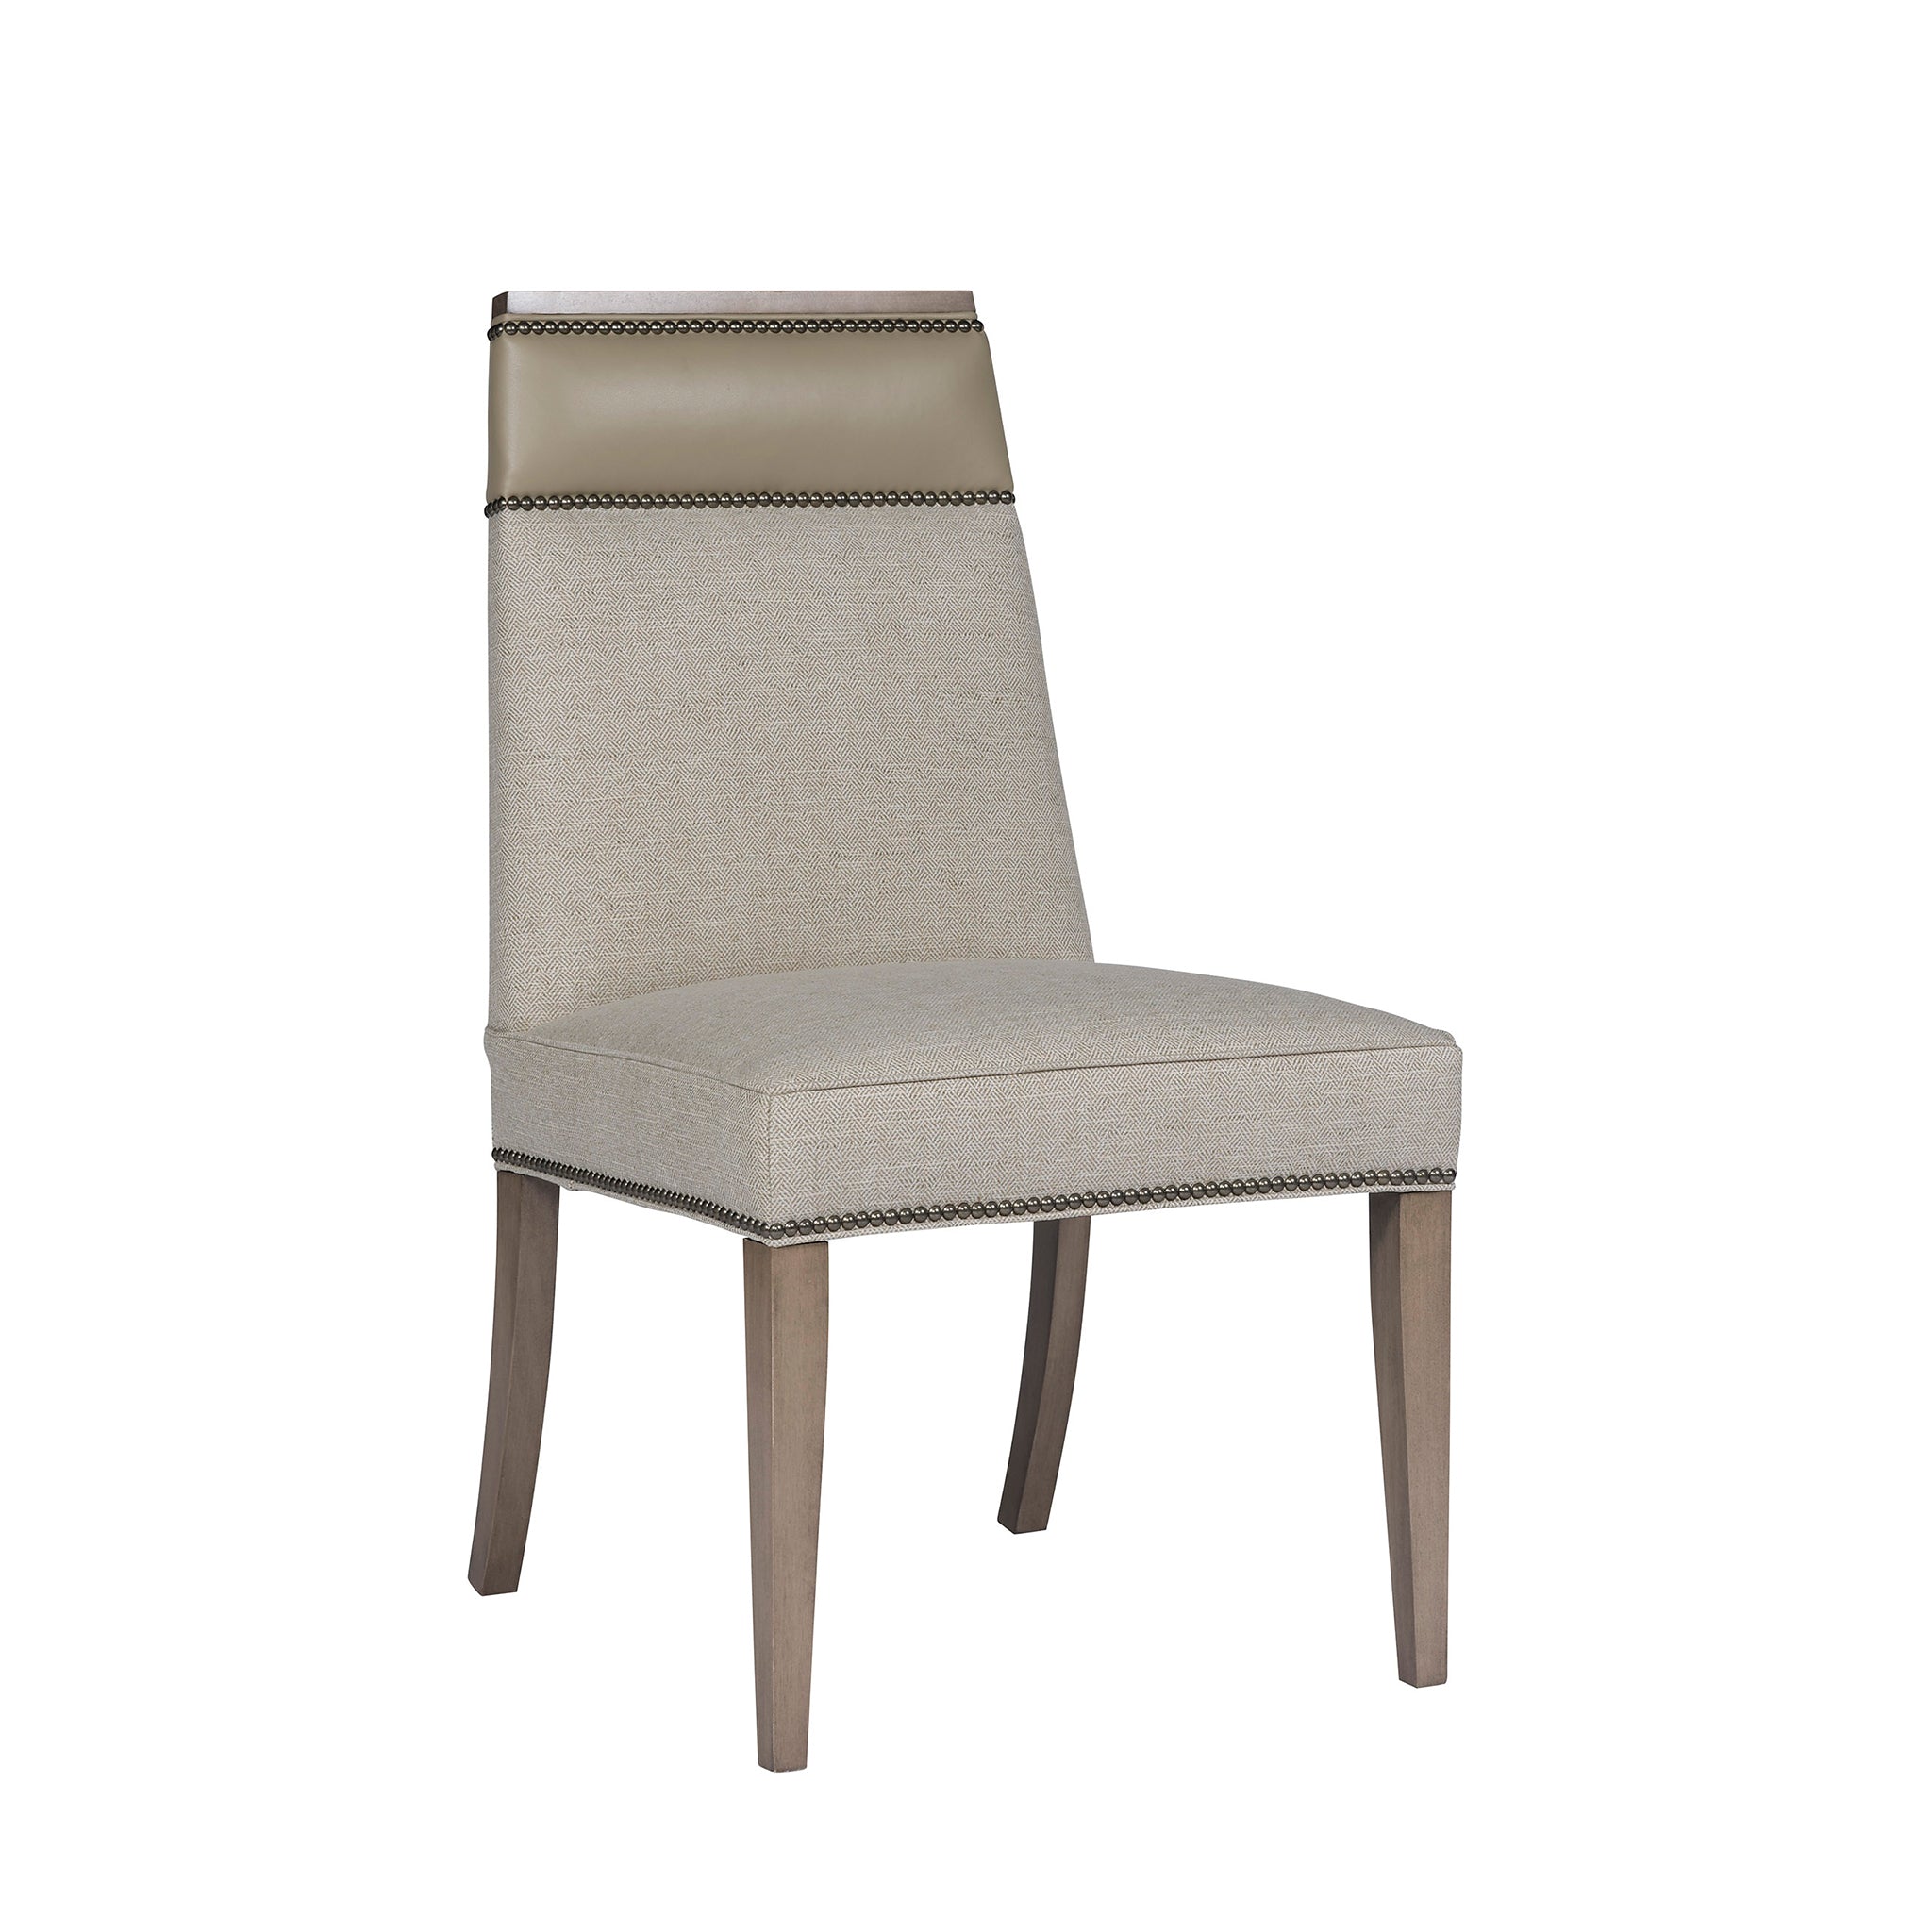 vanguard phelps stocked dining side chair dining chairs 